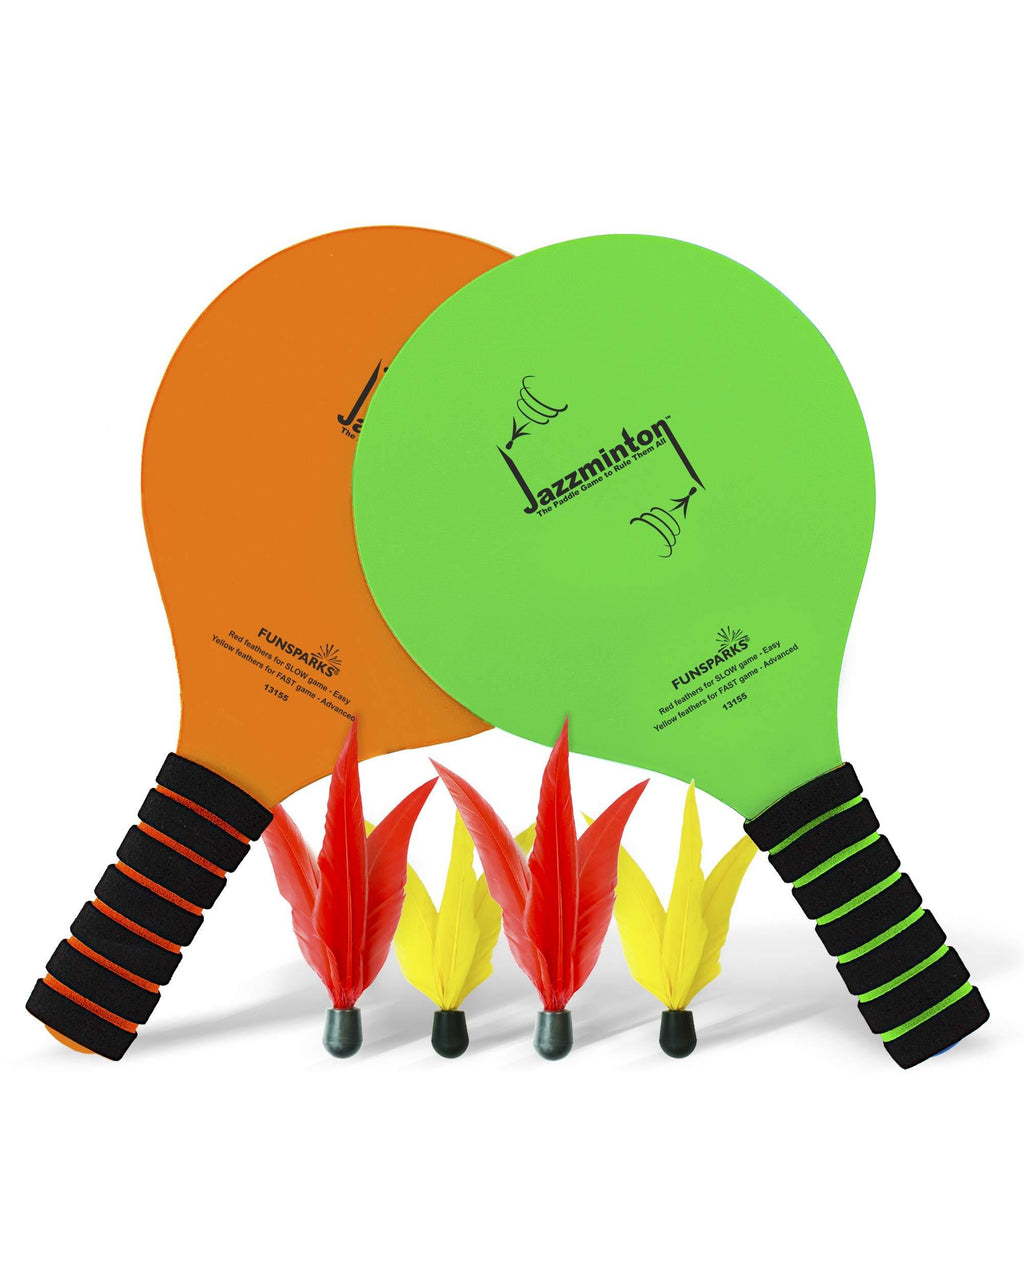 Funsparks Paddle Ball Jazzminton Game - All-Season Indoor/Outdoor Racquet Game for Active Play Fluorescent Orange and Green Paddles - BeesActive Australia